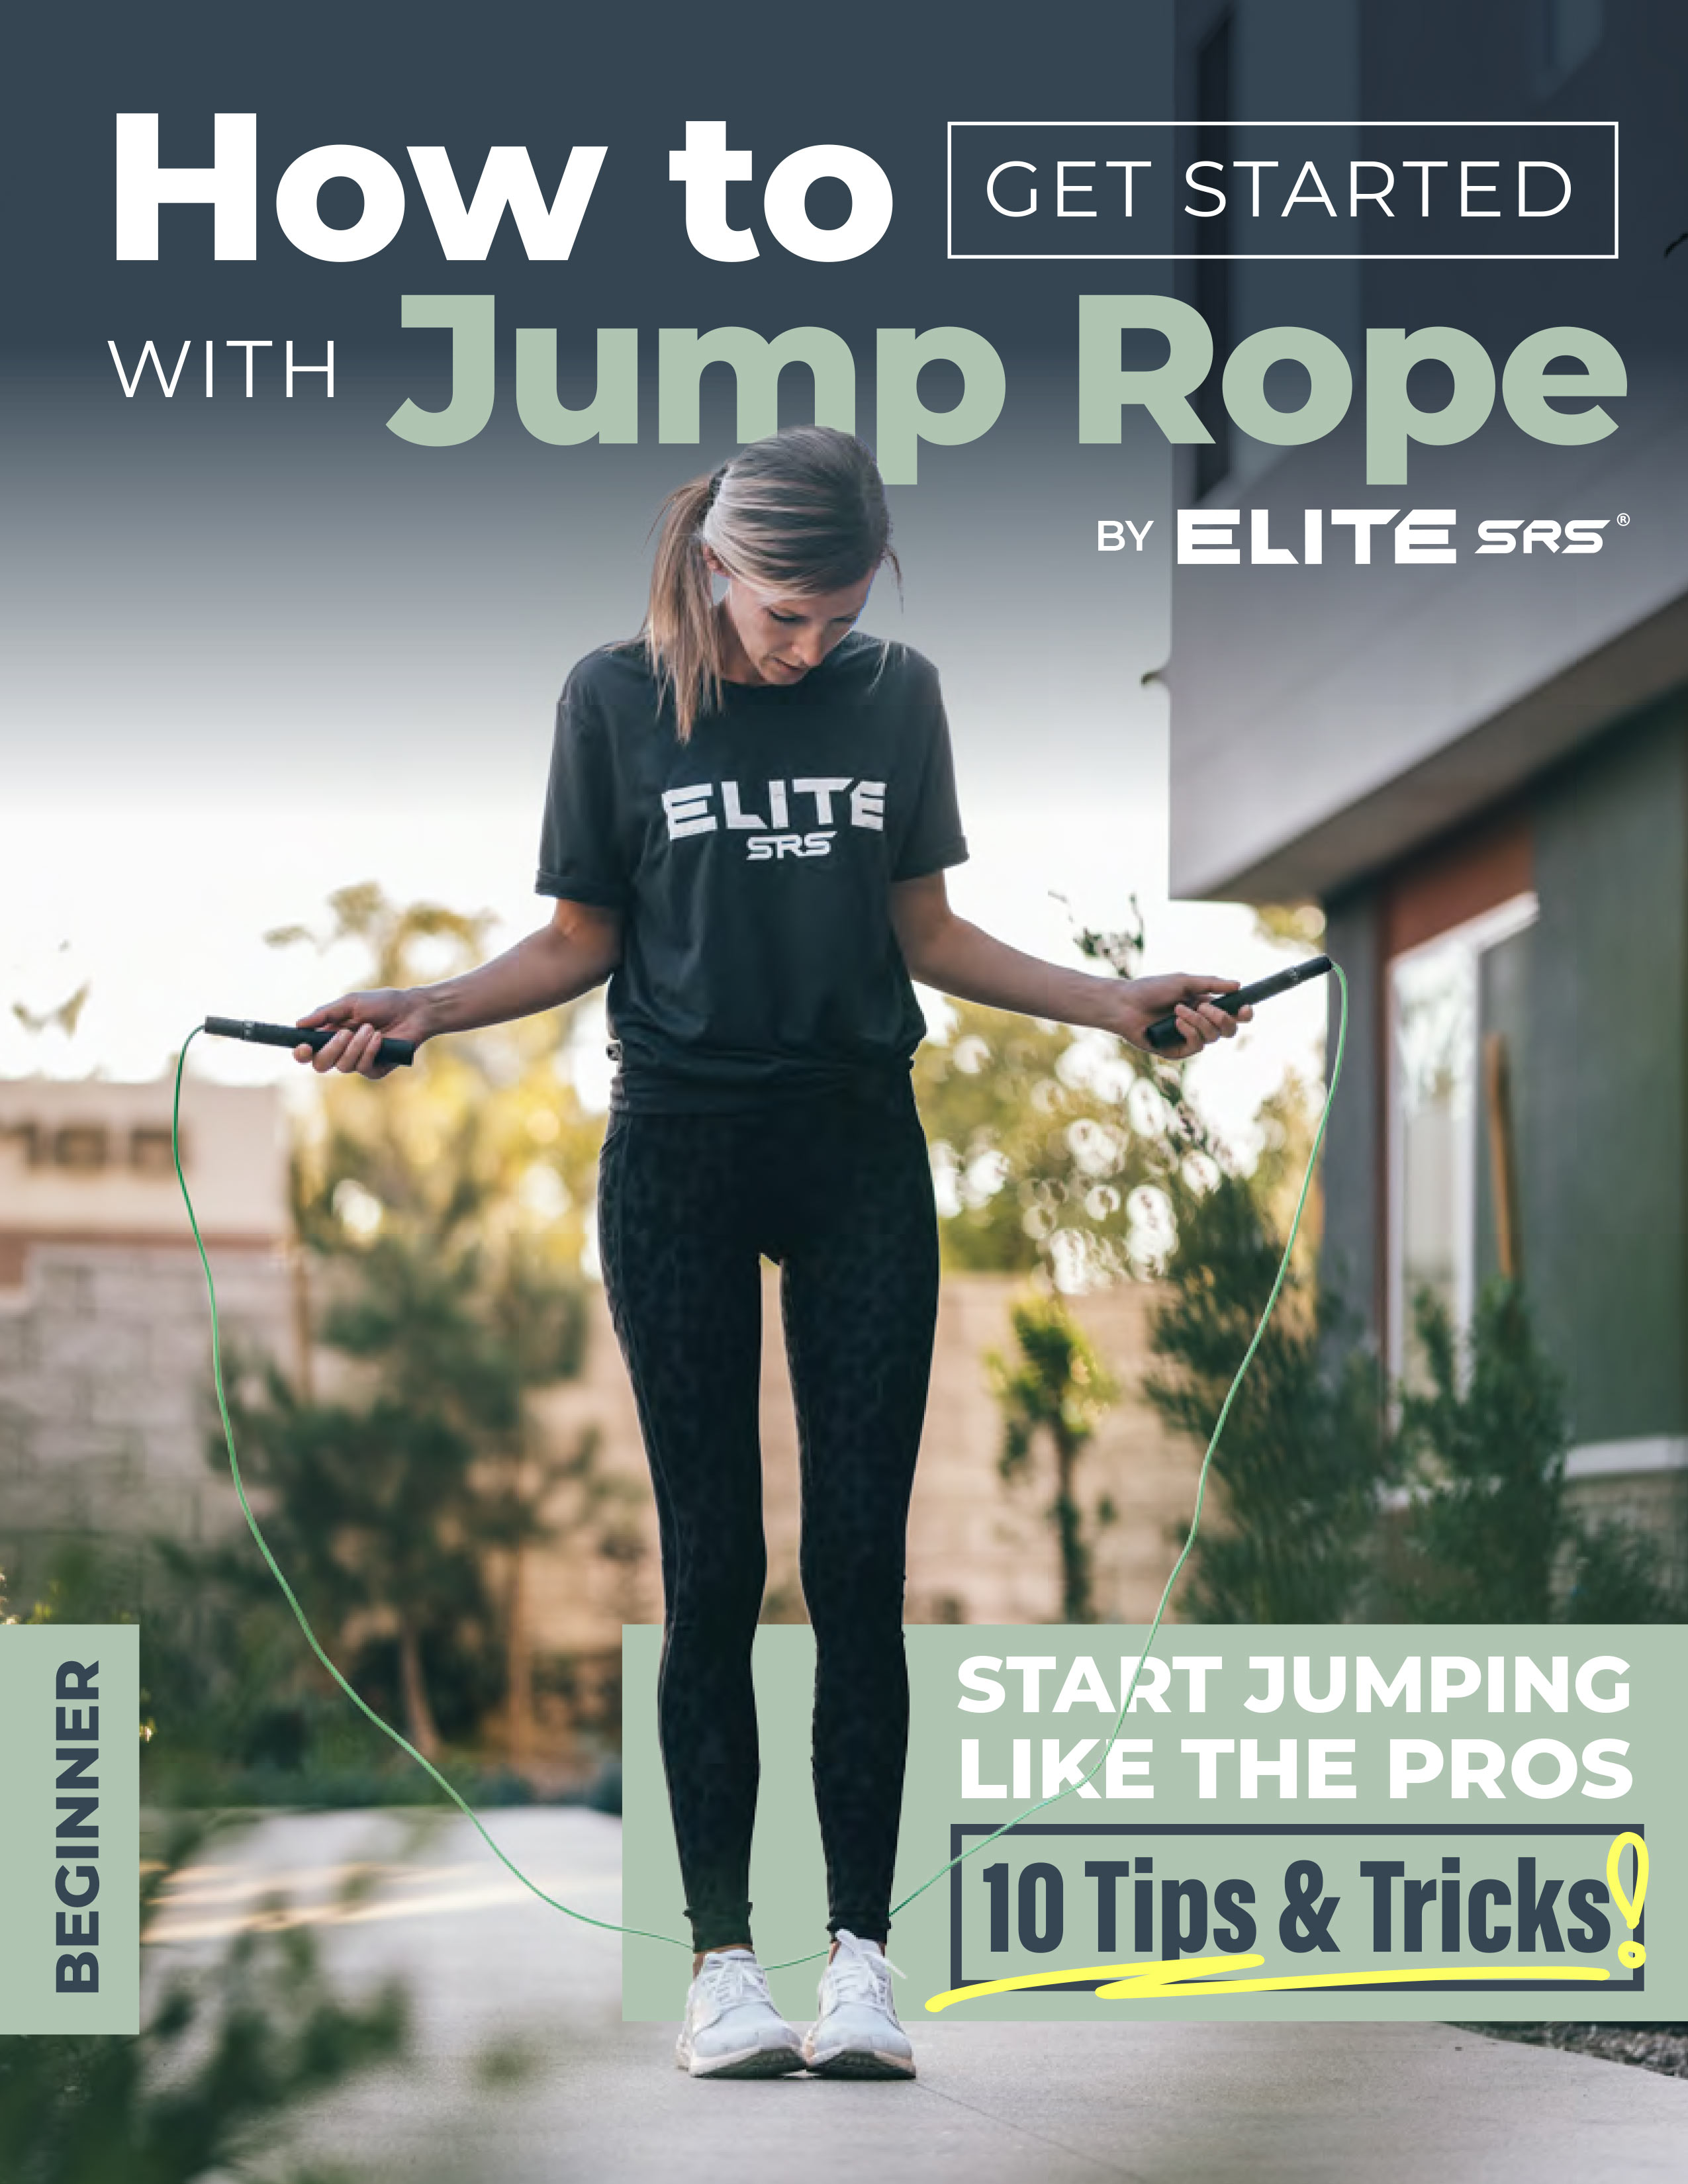 How-to-Get-Started-with-Jump-Rope_20220830-1-1